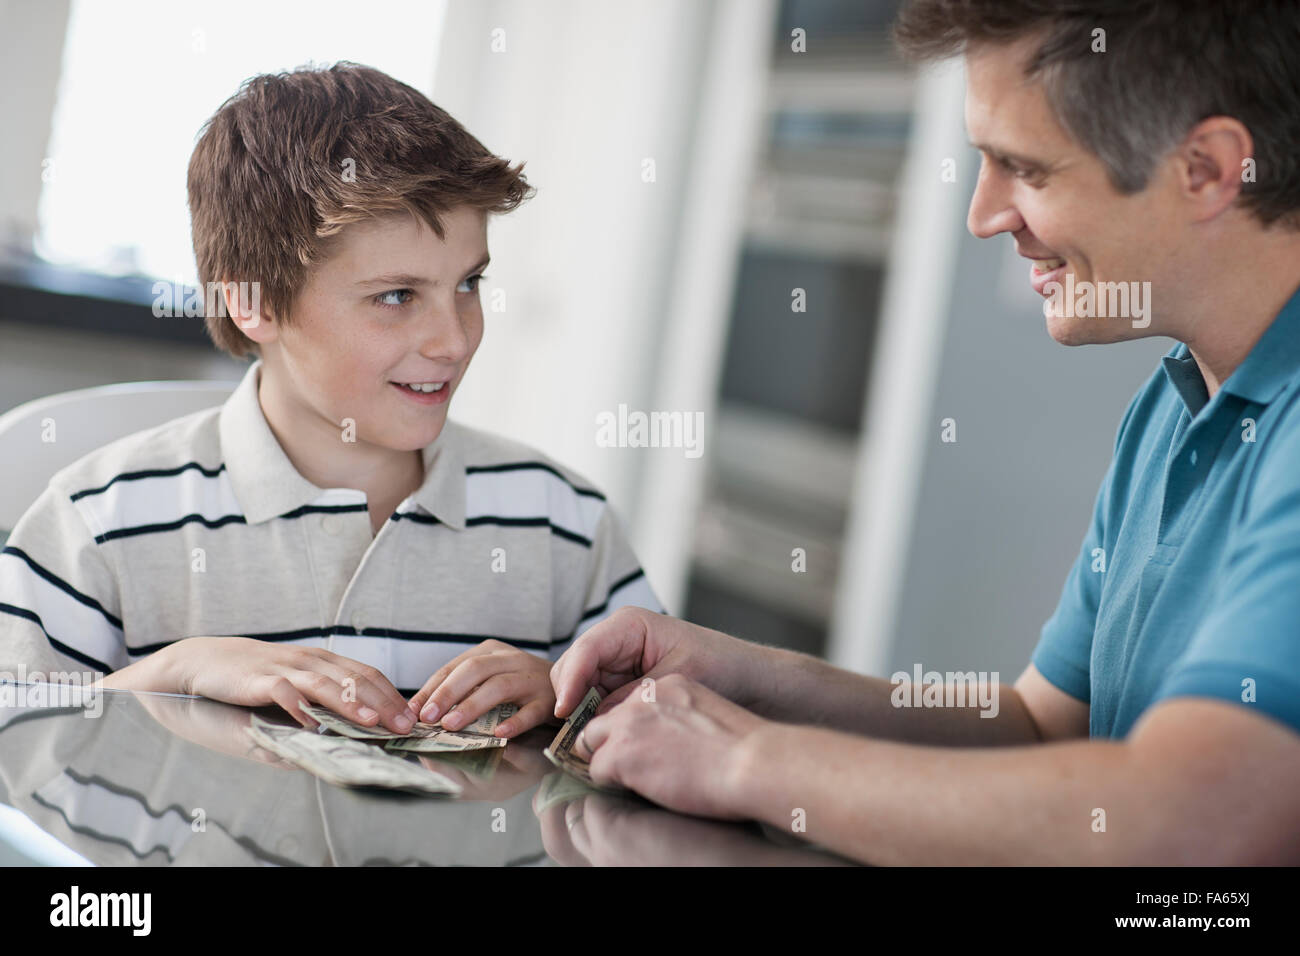 A man and a boy seated at a table, counting and handling cash. Stock Photo